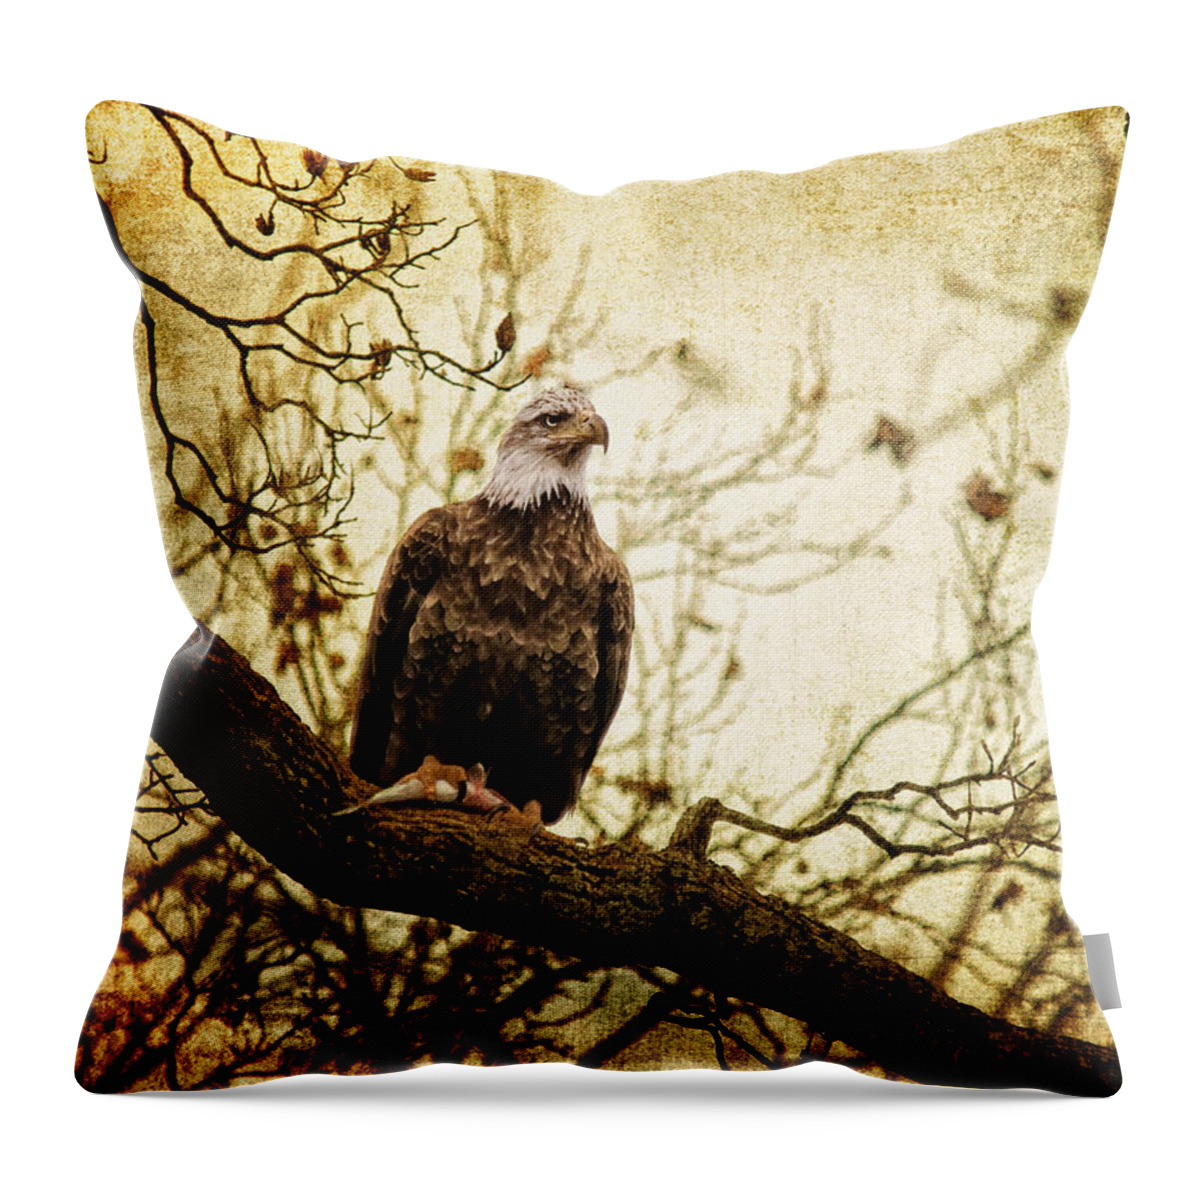 Eagle Throw Pillow featuring the photograph Pride by Lois Bryan